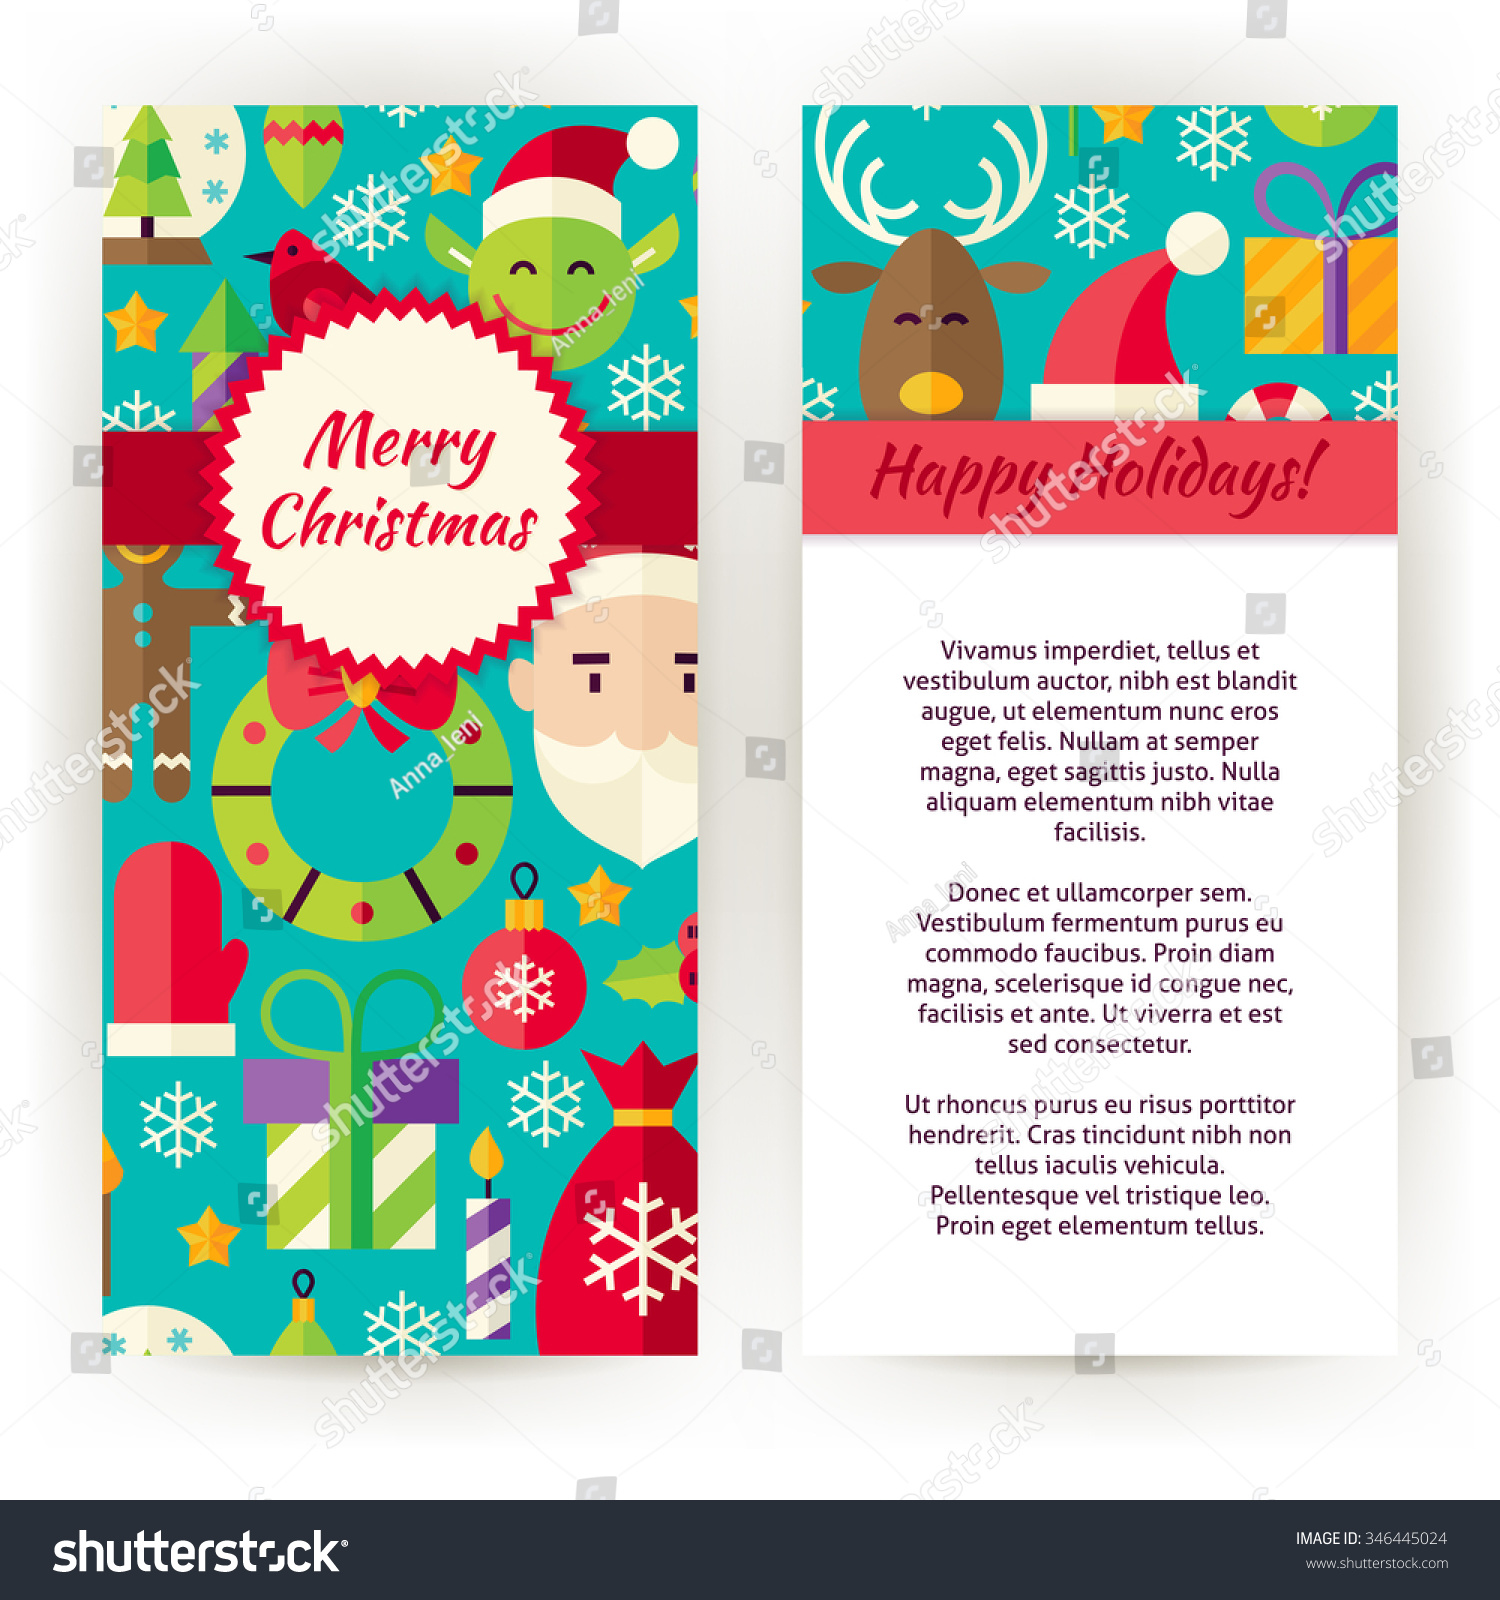 Flyer Template of Merry Christmas Objects and Elements Flat Style Design Vector Illustration of Brand